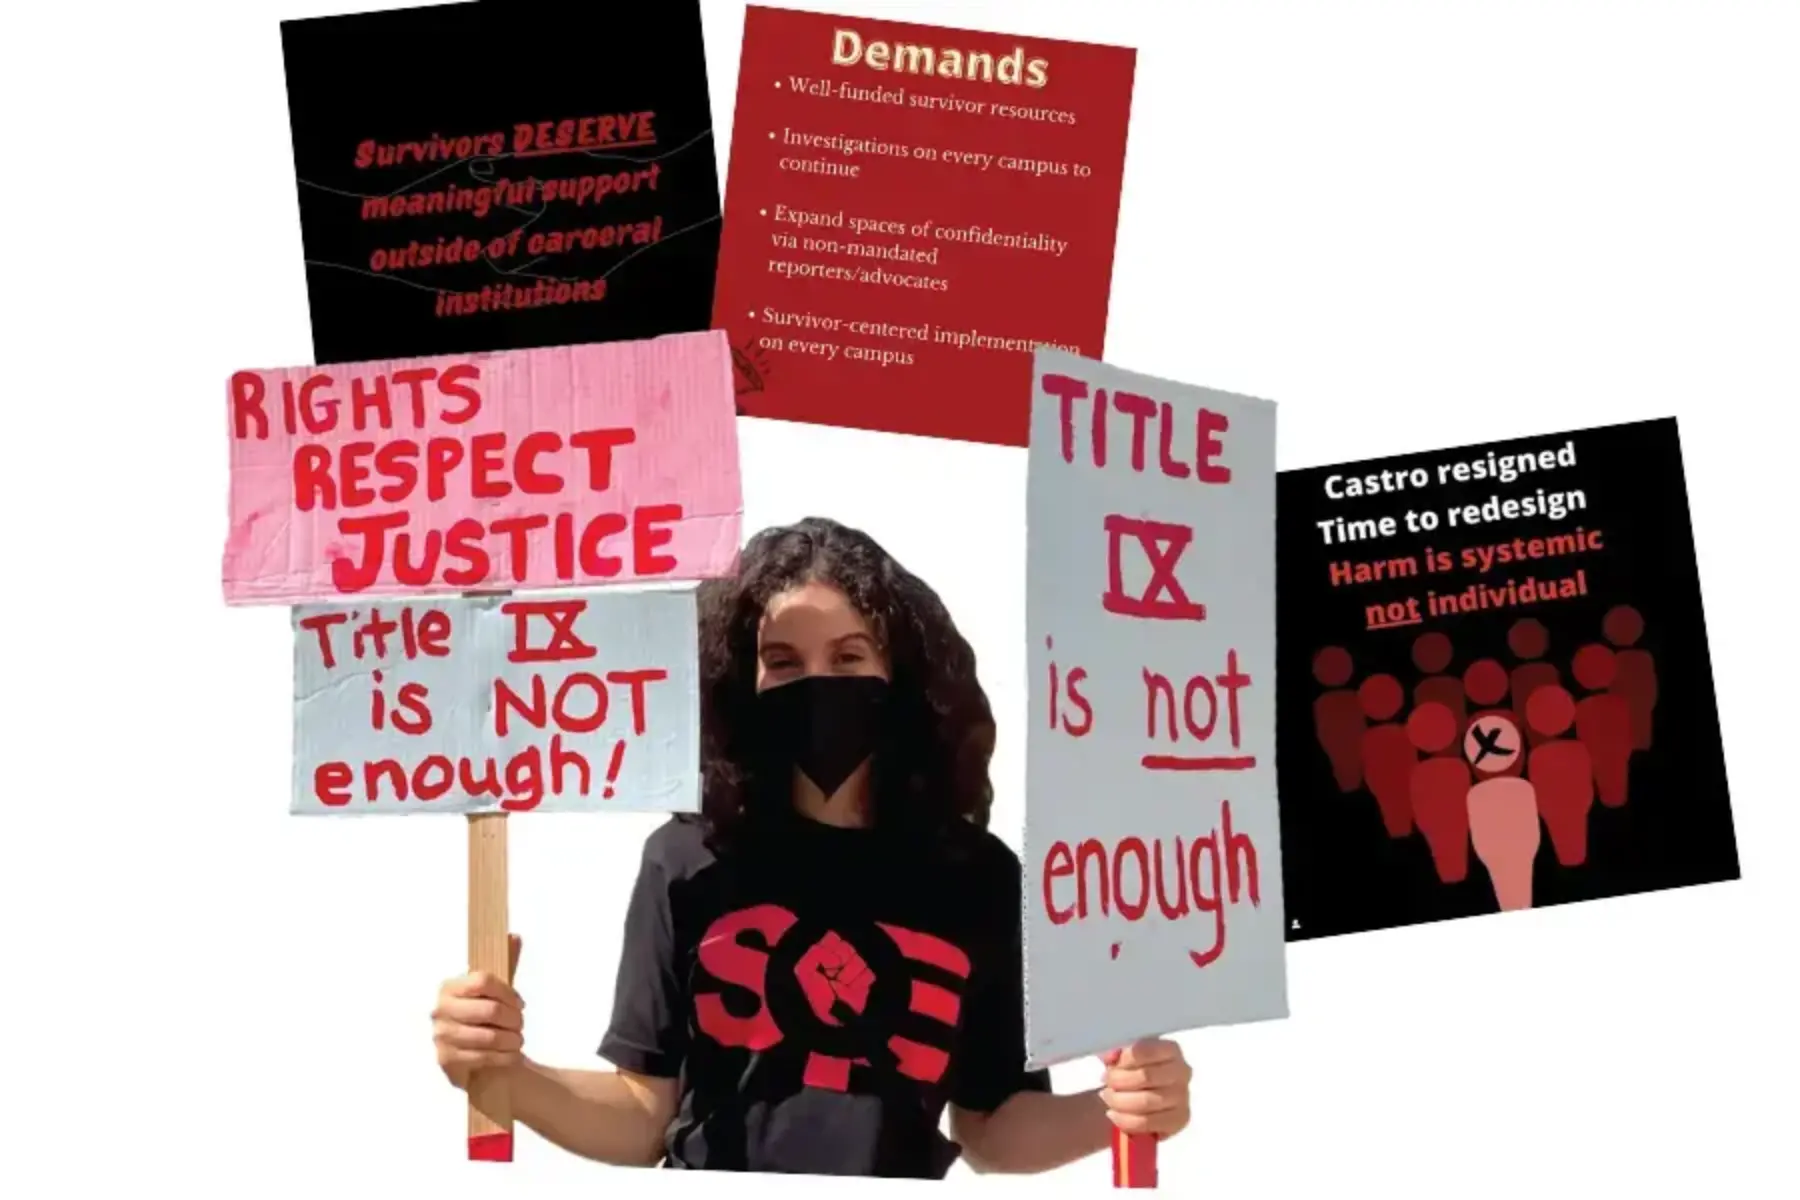 White background with a photo of a student wearing a black shirt with red SQE letters on it. The student is wearing a face mask and holding white and pink signs with red text that reads rights respect justice; and Title IX is NOT enough. Surrounding the student are three social media graphics: the one on the left is black background with maroon text that reads survivors deserve meaningful support outside of carceral institutions. Another graphic has a red background and a list of demands. The other graphic is black with white and red text reading Castro resigned, time to redesign. Harm is systemic not individual.